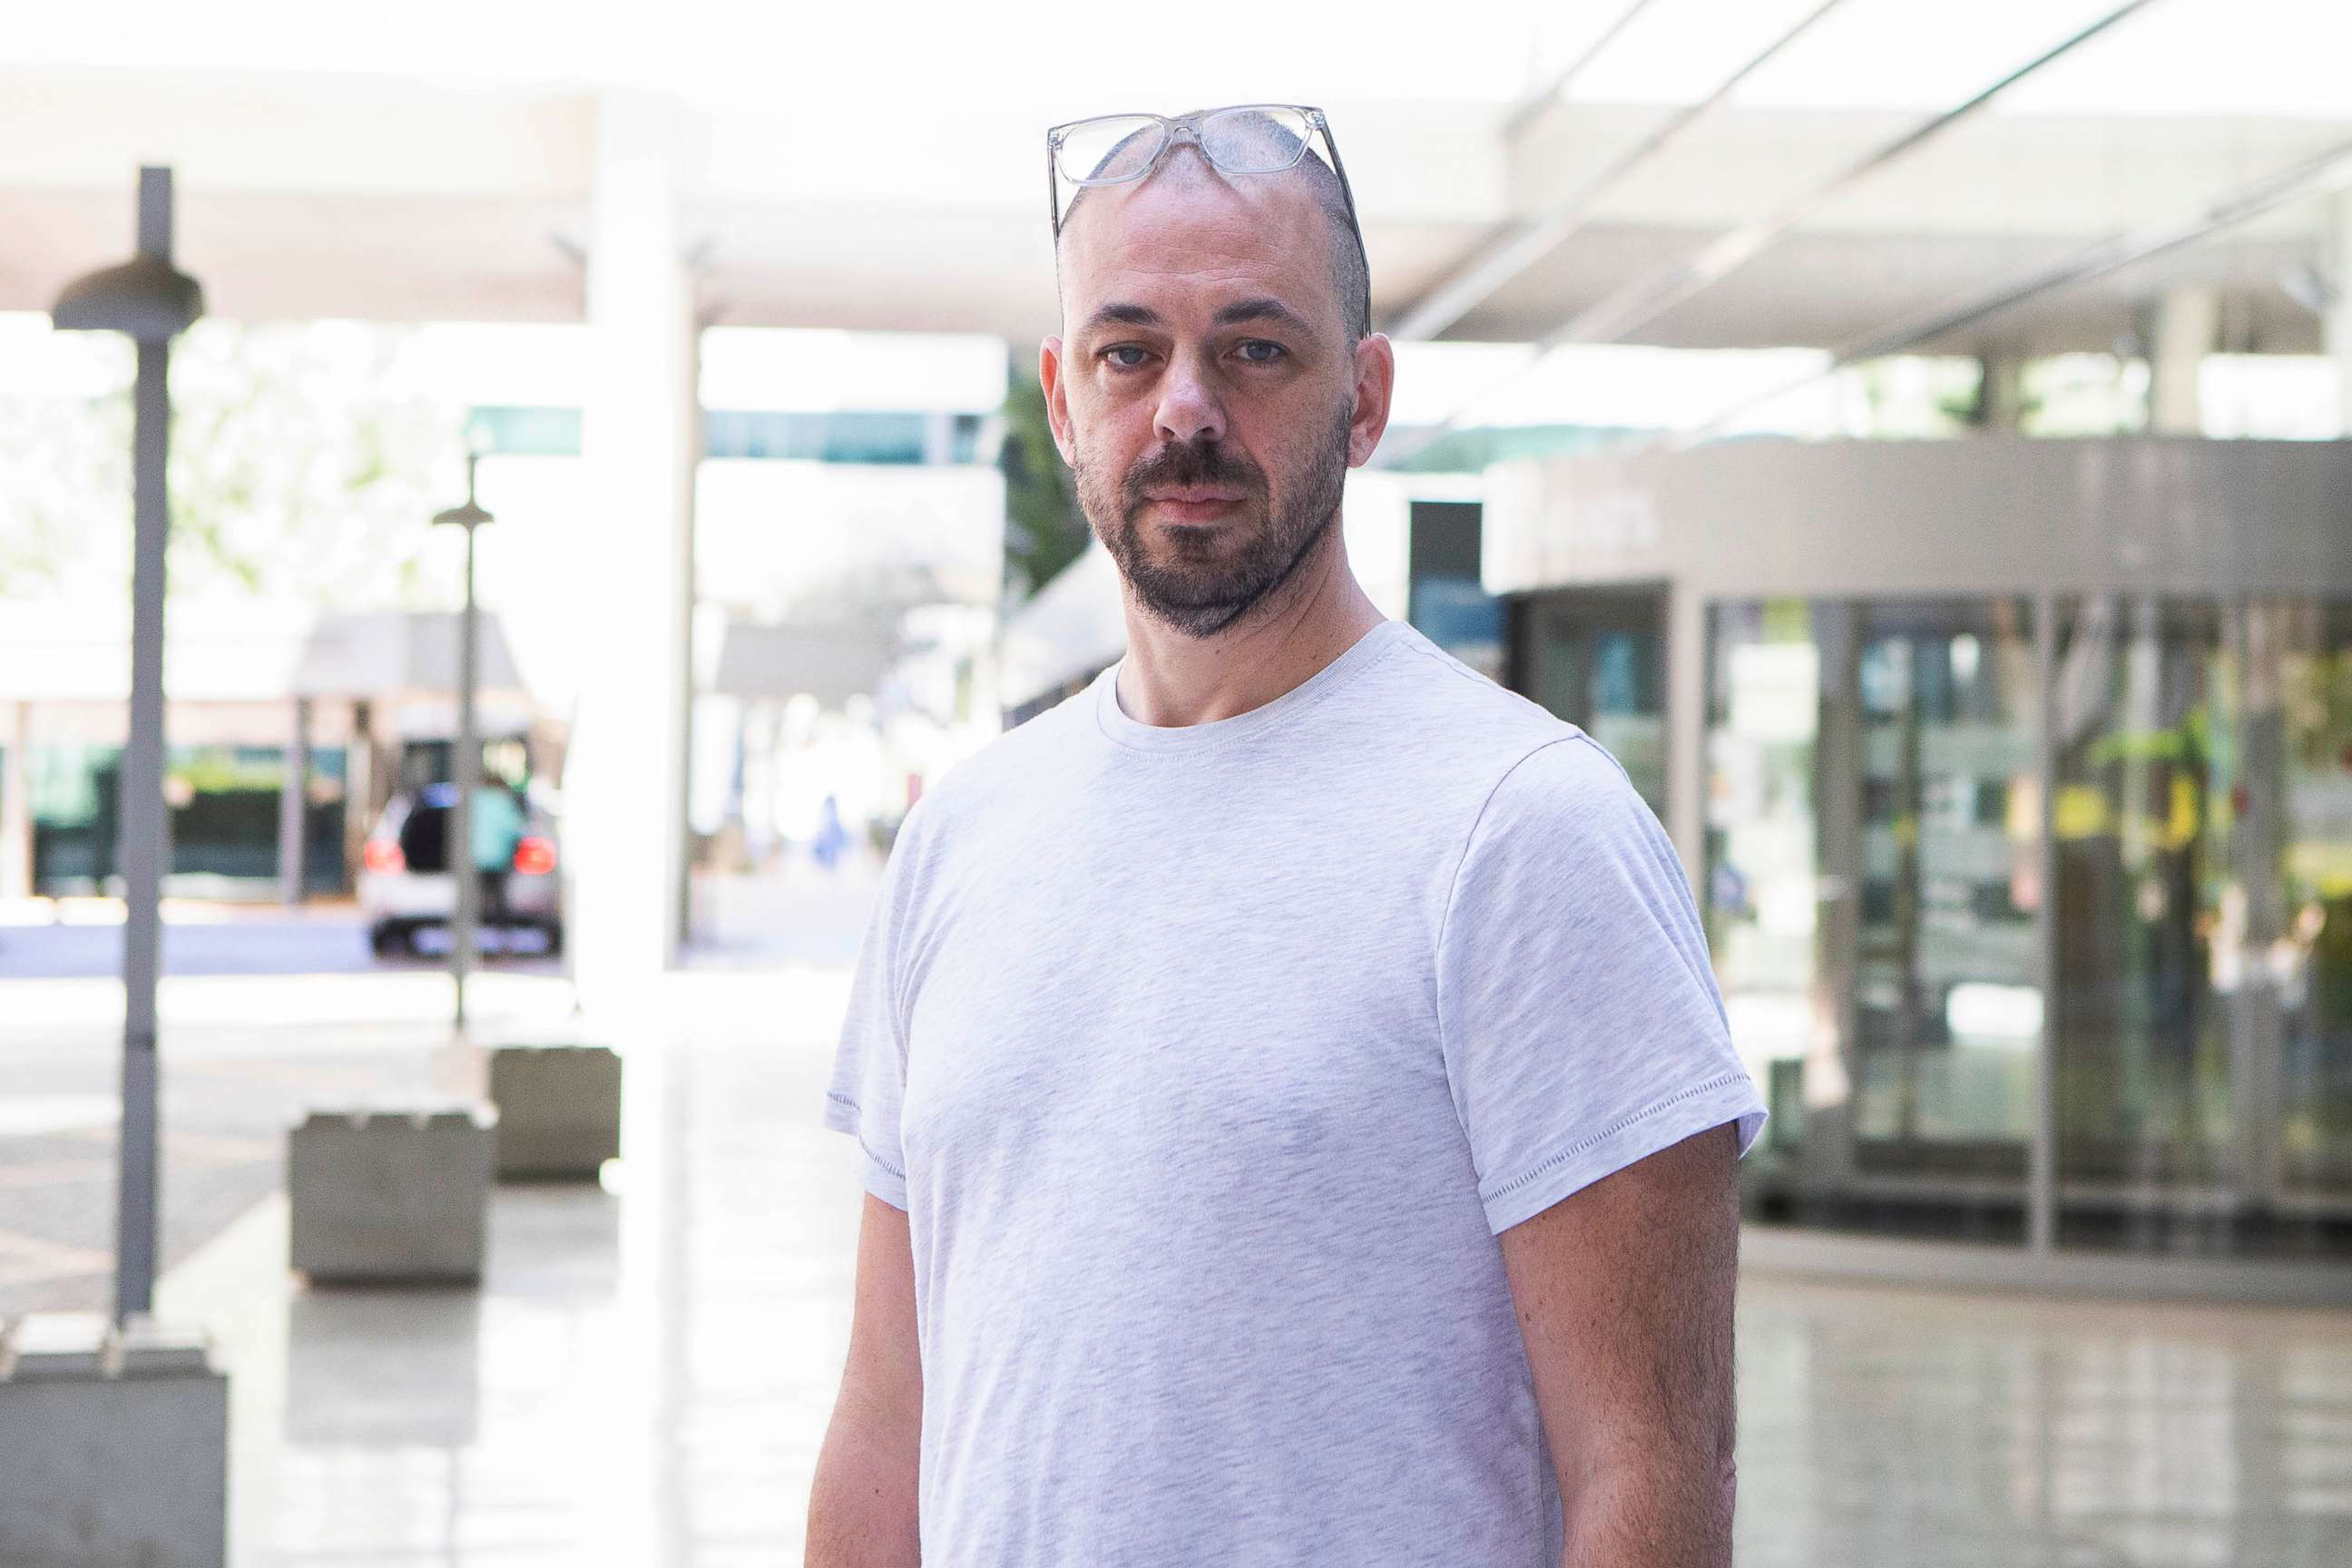 PHOTO: Andrea Prudente's husband Jay Weeldreyer poses for a photo at the Son Espases University Hospital in Palma Mallorca, Spain, June 24, 2022.